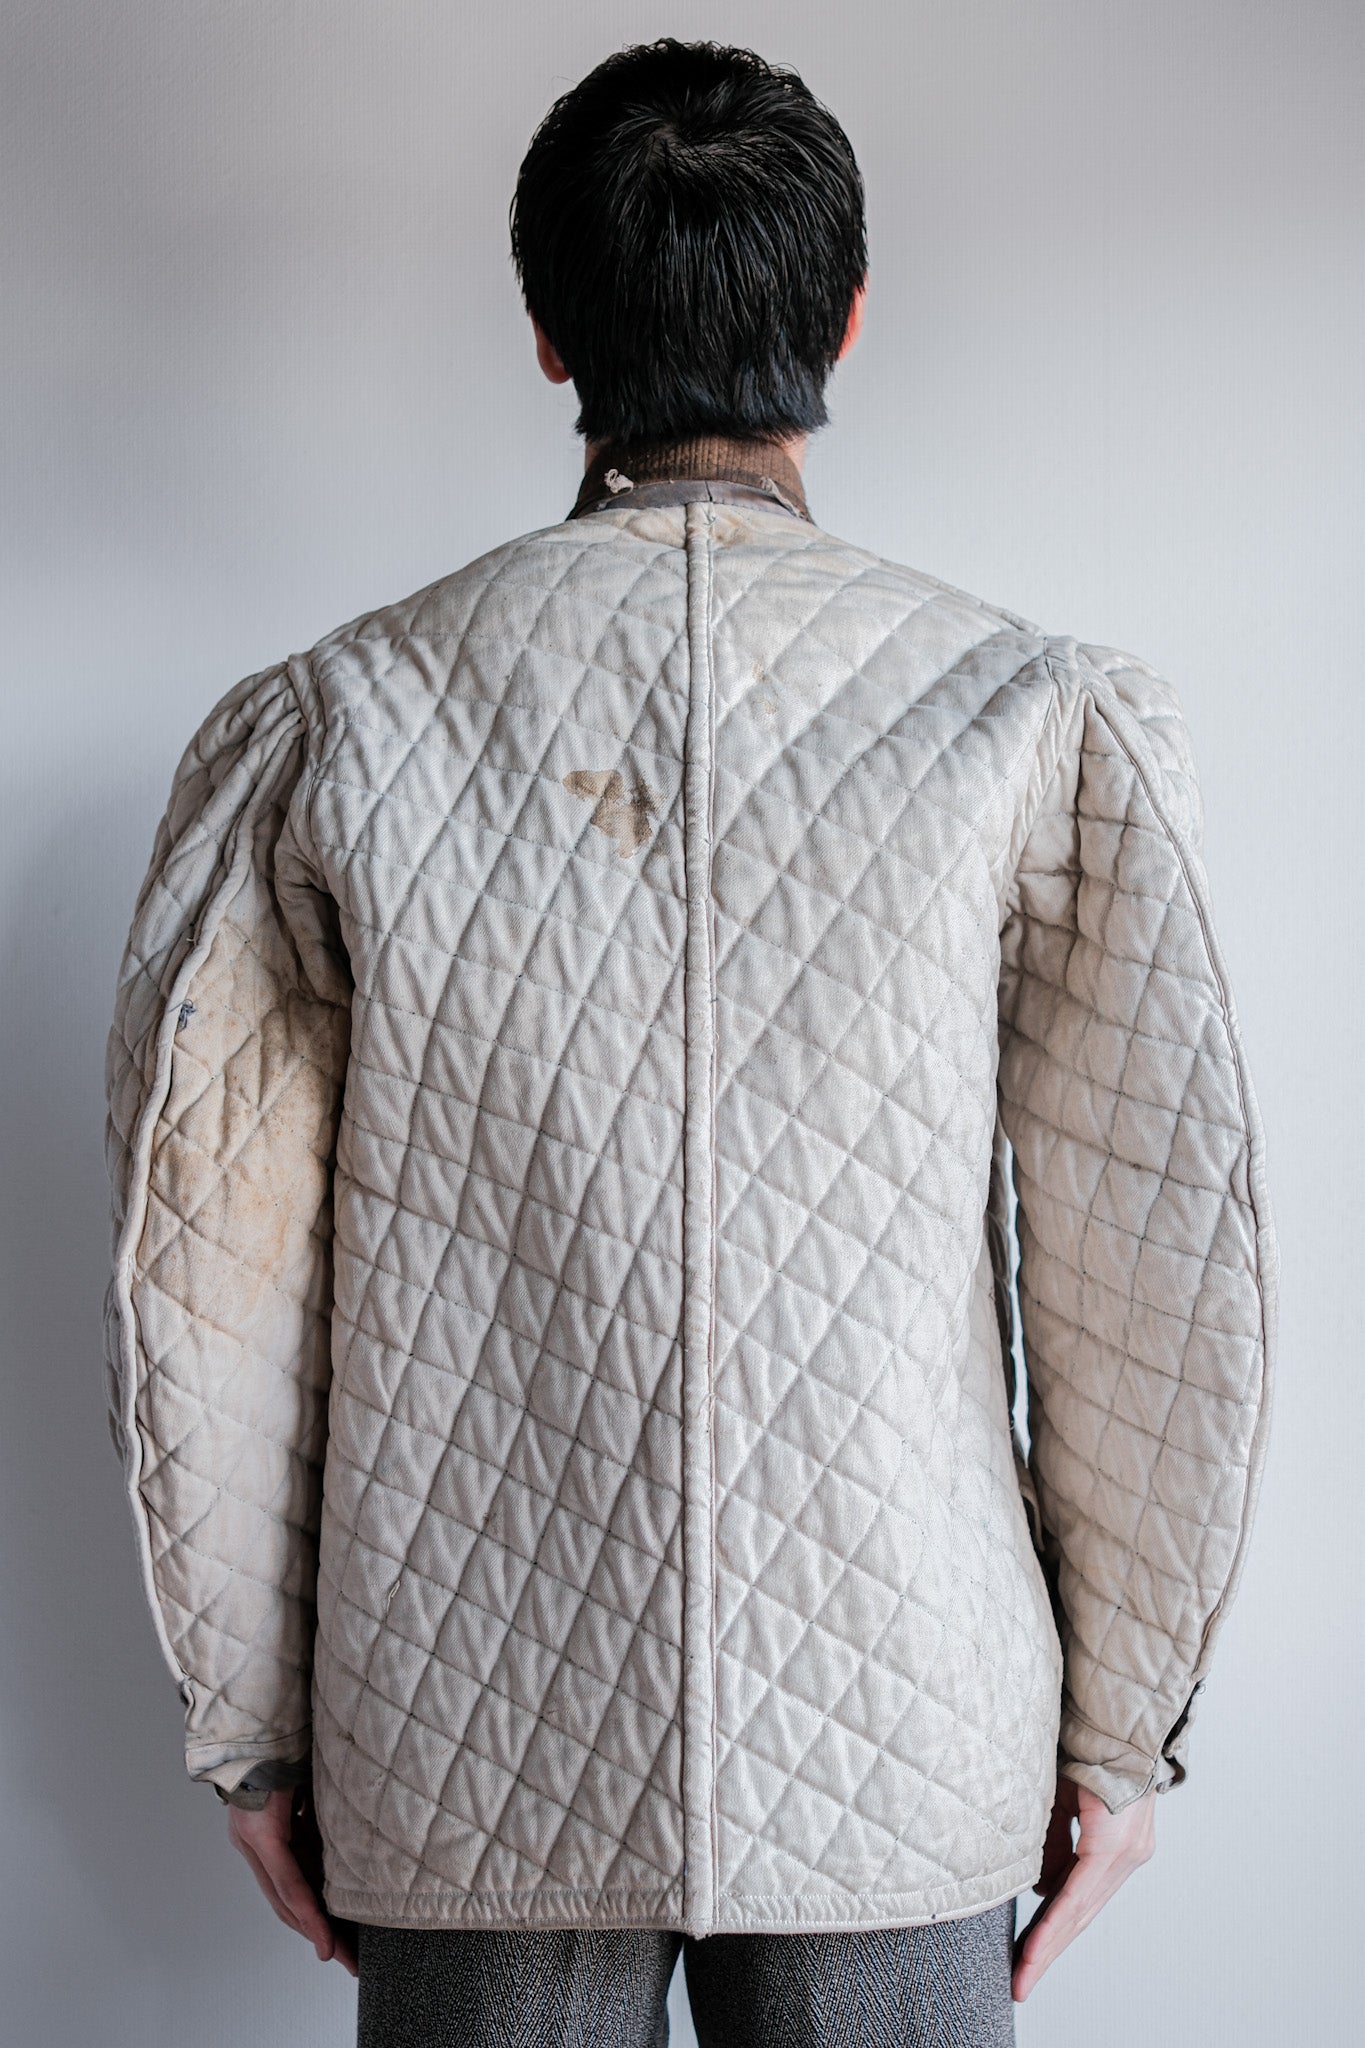 【~40's】WWⅡ German Army Gray-White Reversible Quilted Winter Parka "Modified" "Wehrmacht"